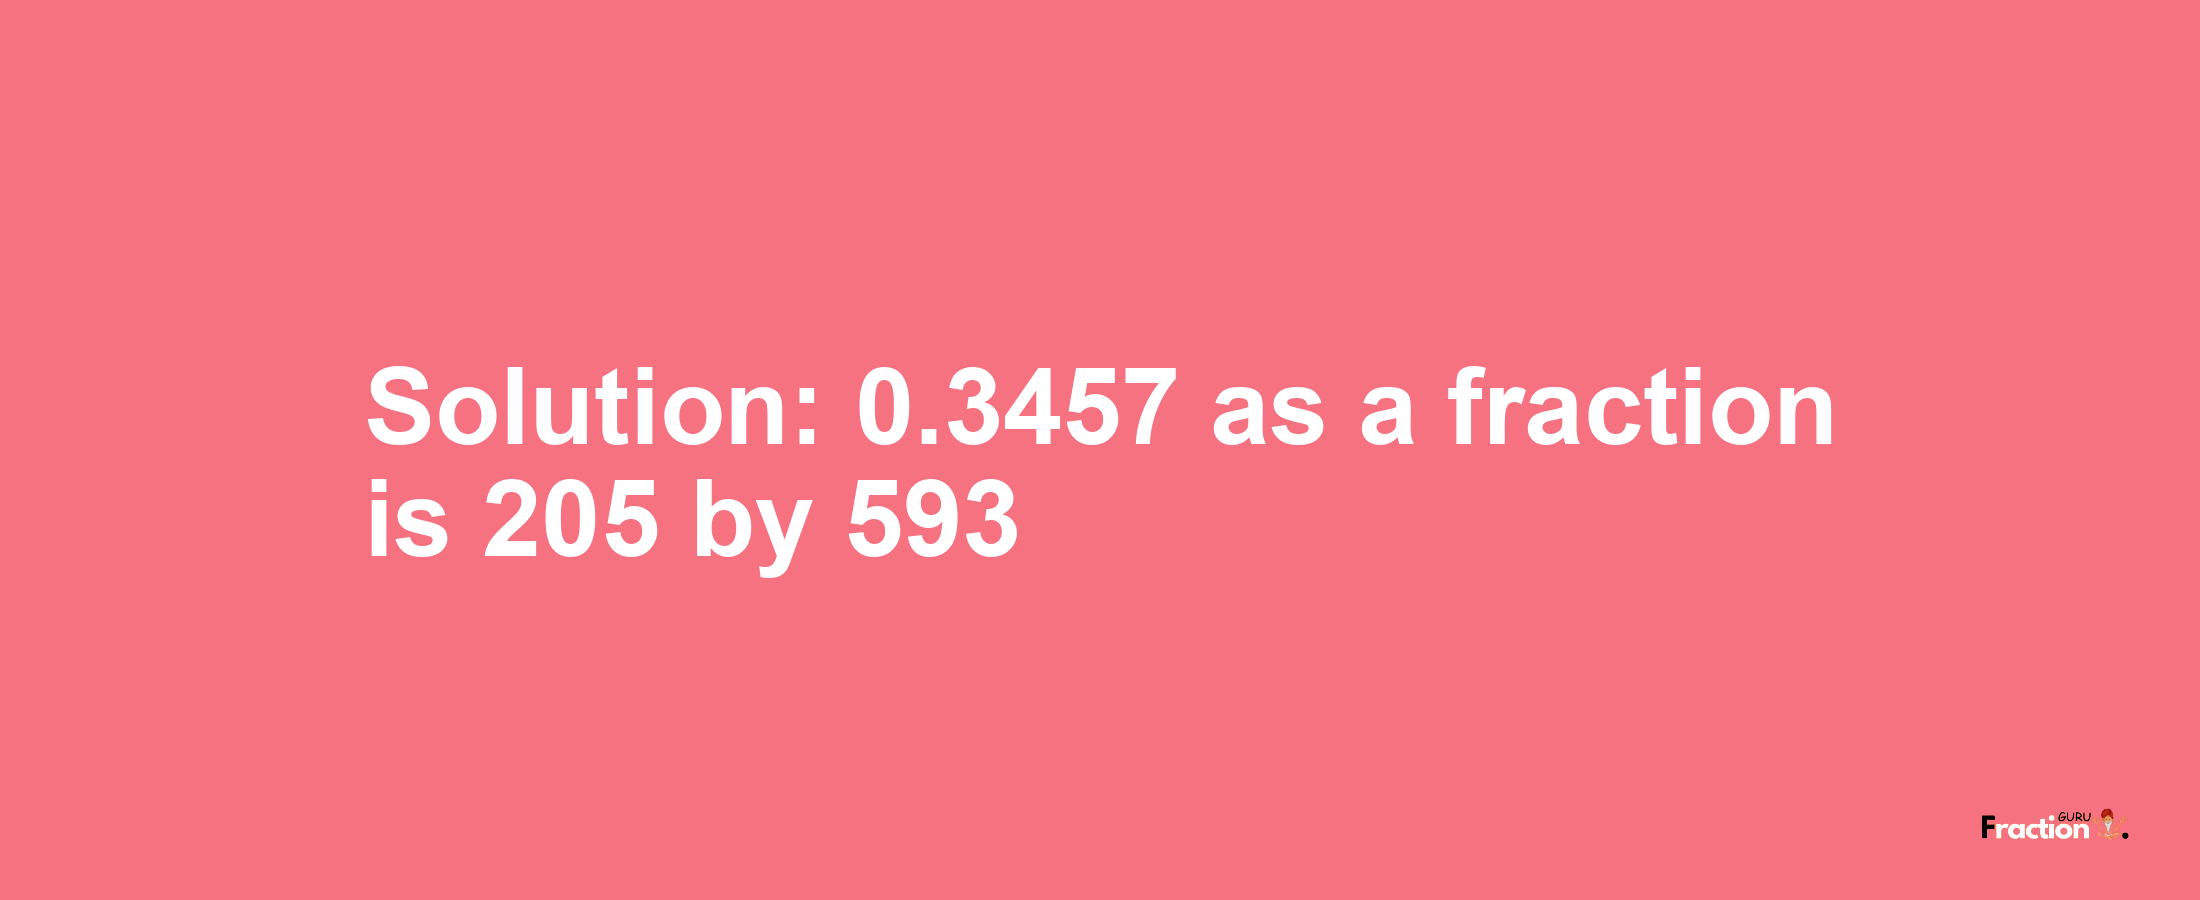 Solution:0.3457 as a fraction is 205/593